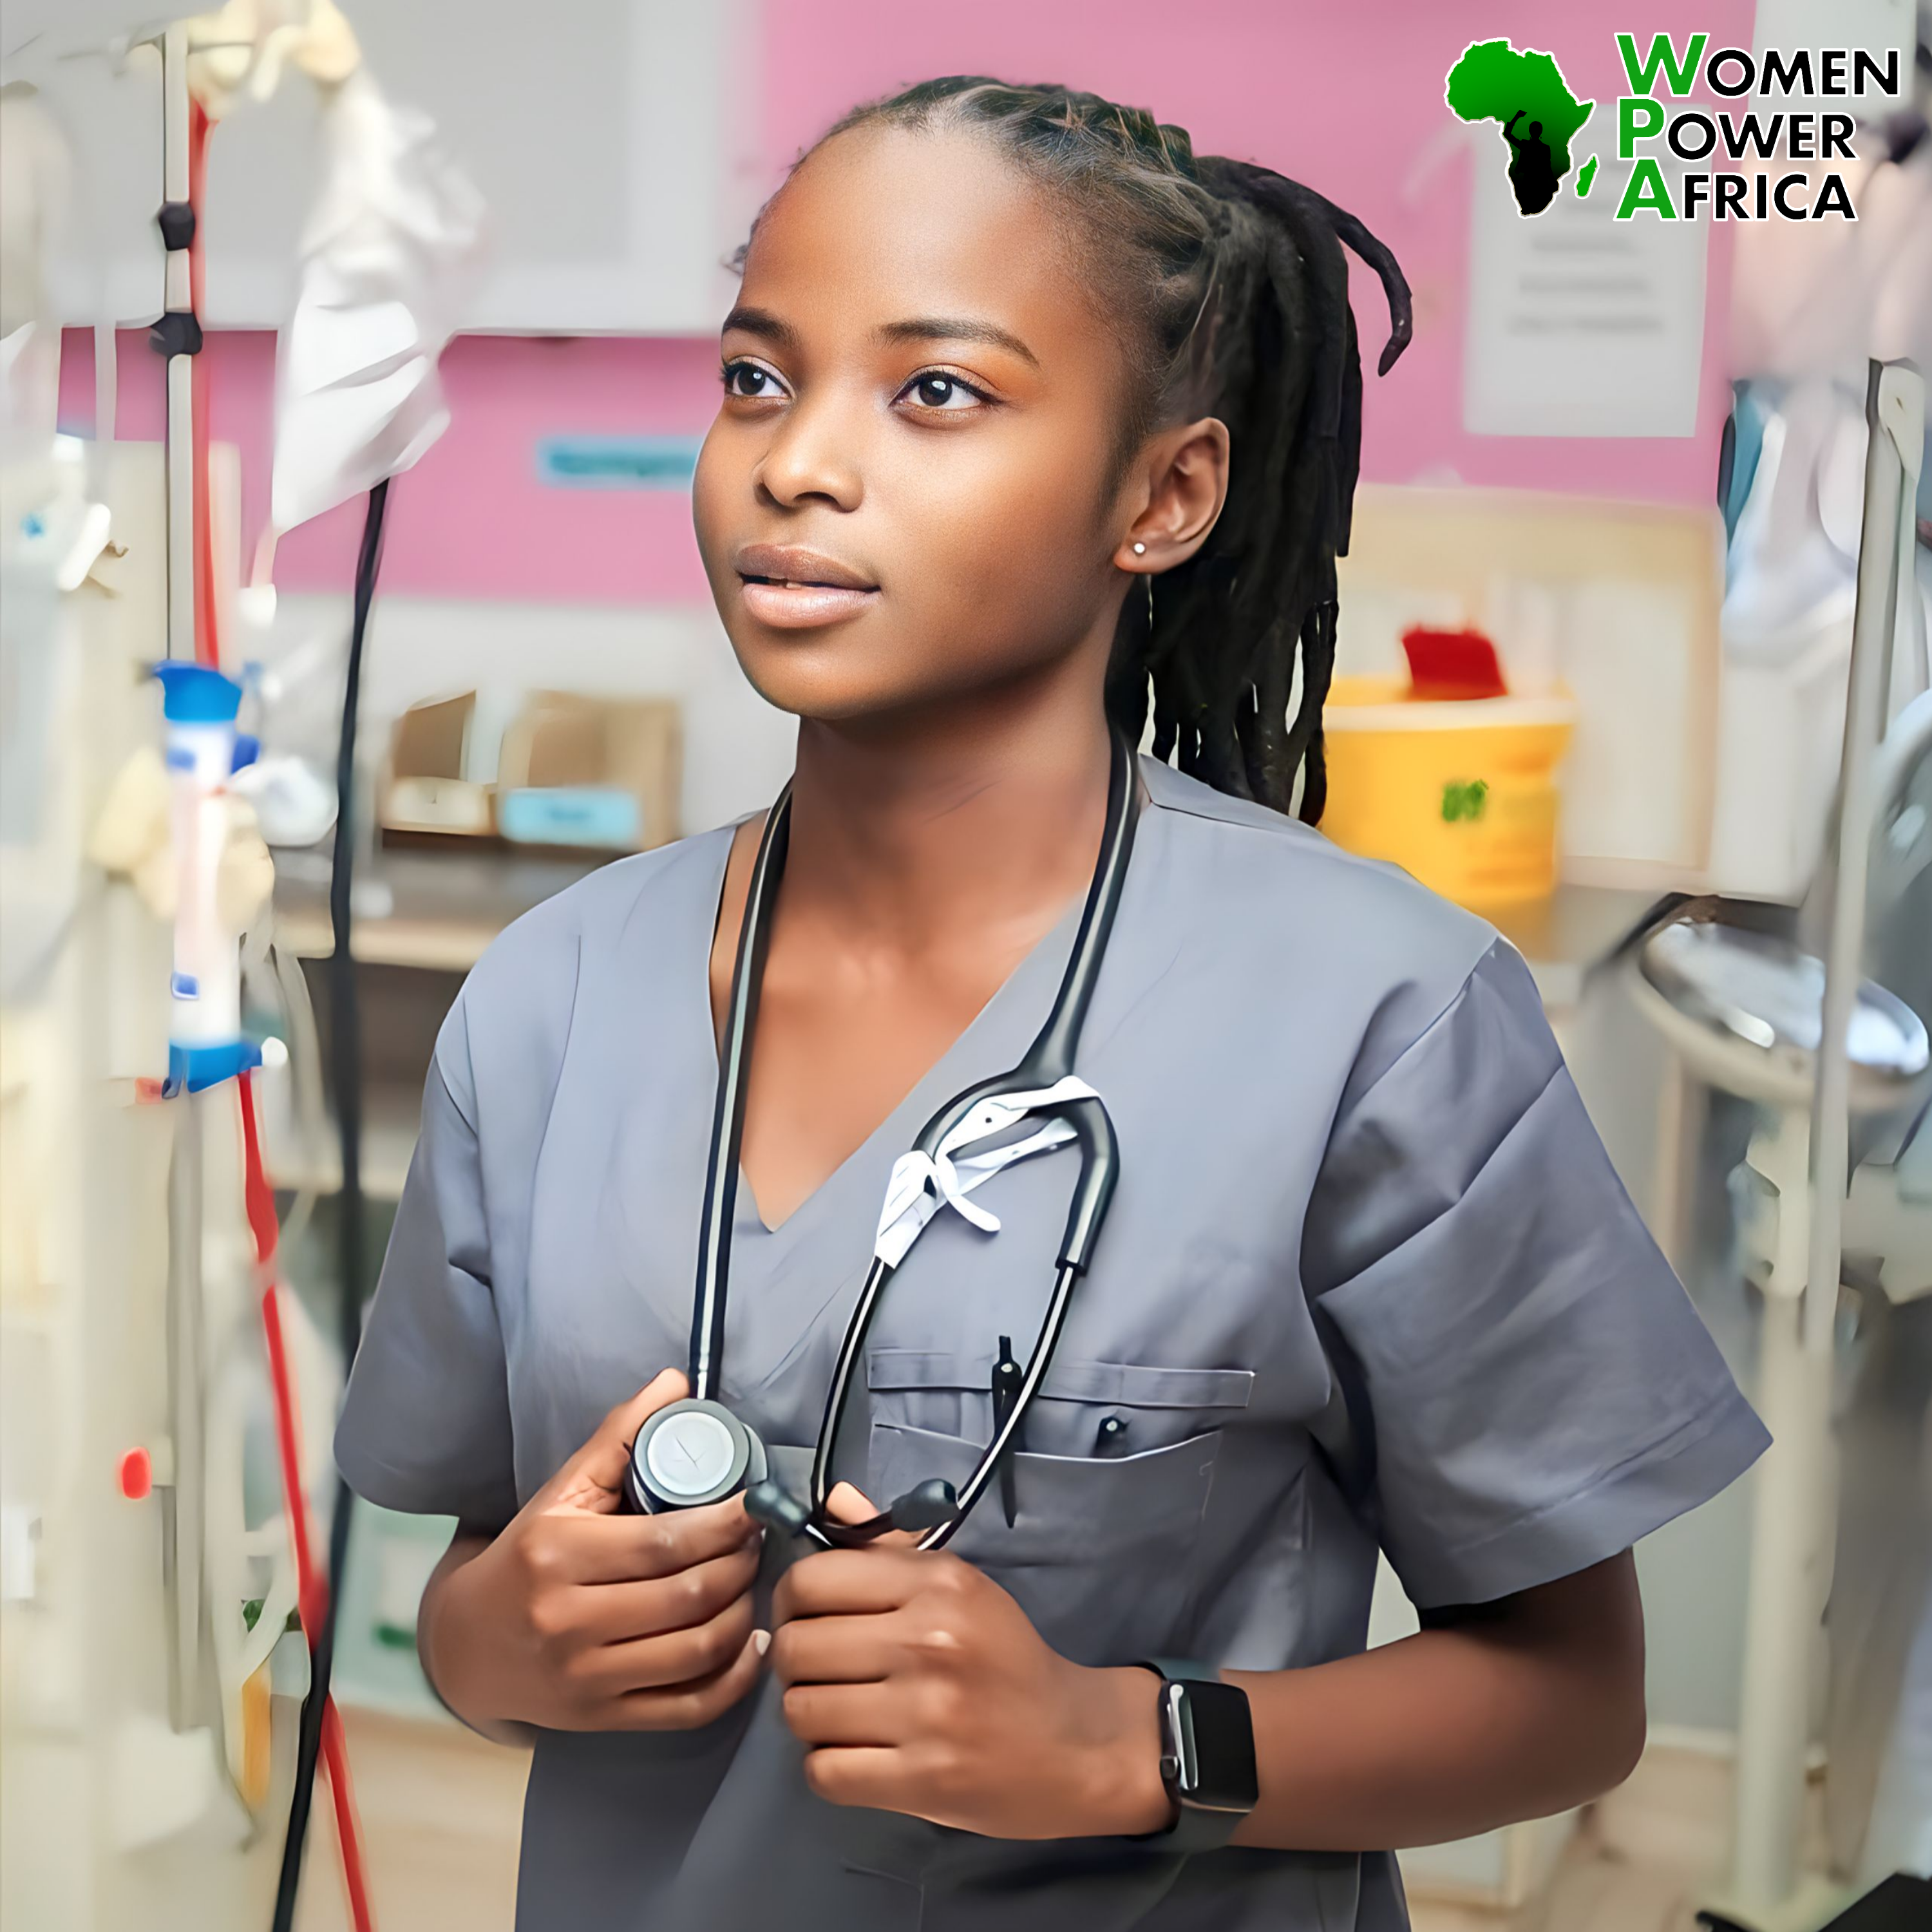 Dr. Thakgalo Thibela: From a village girl to a remarkable Medical Doctor at age 21.